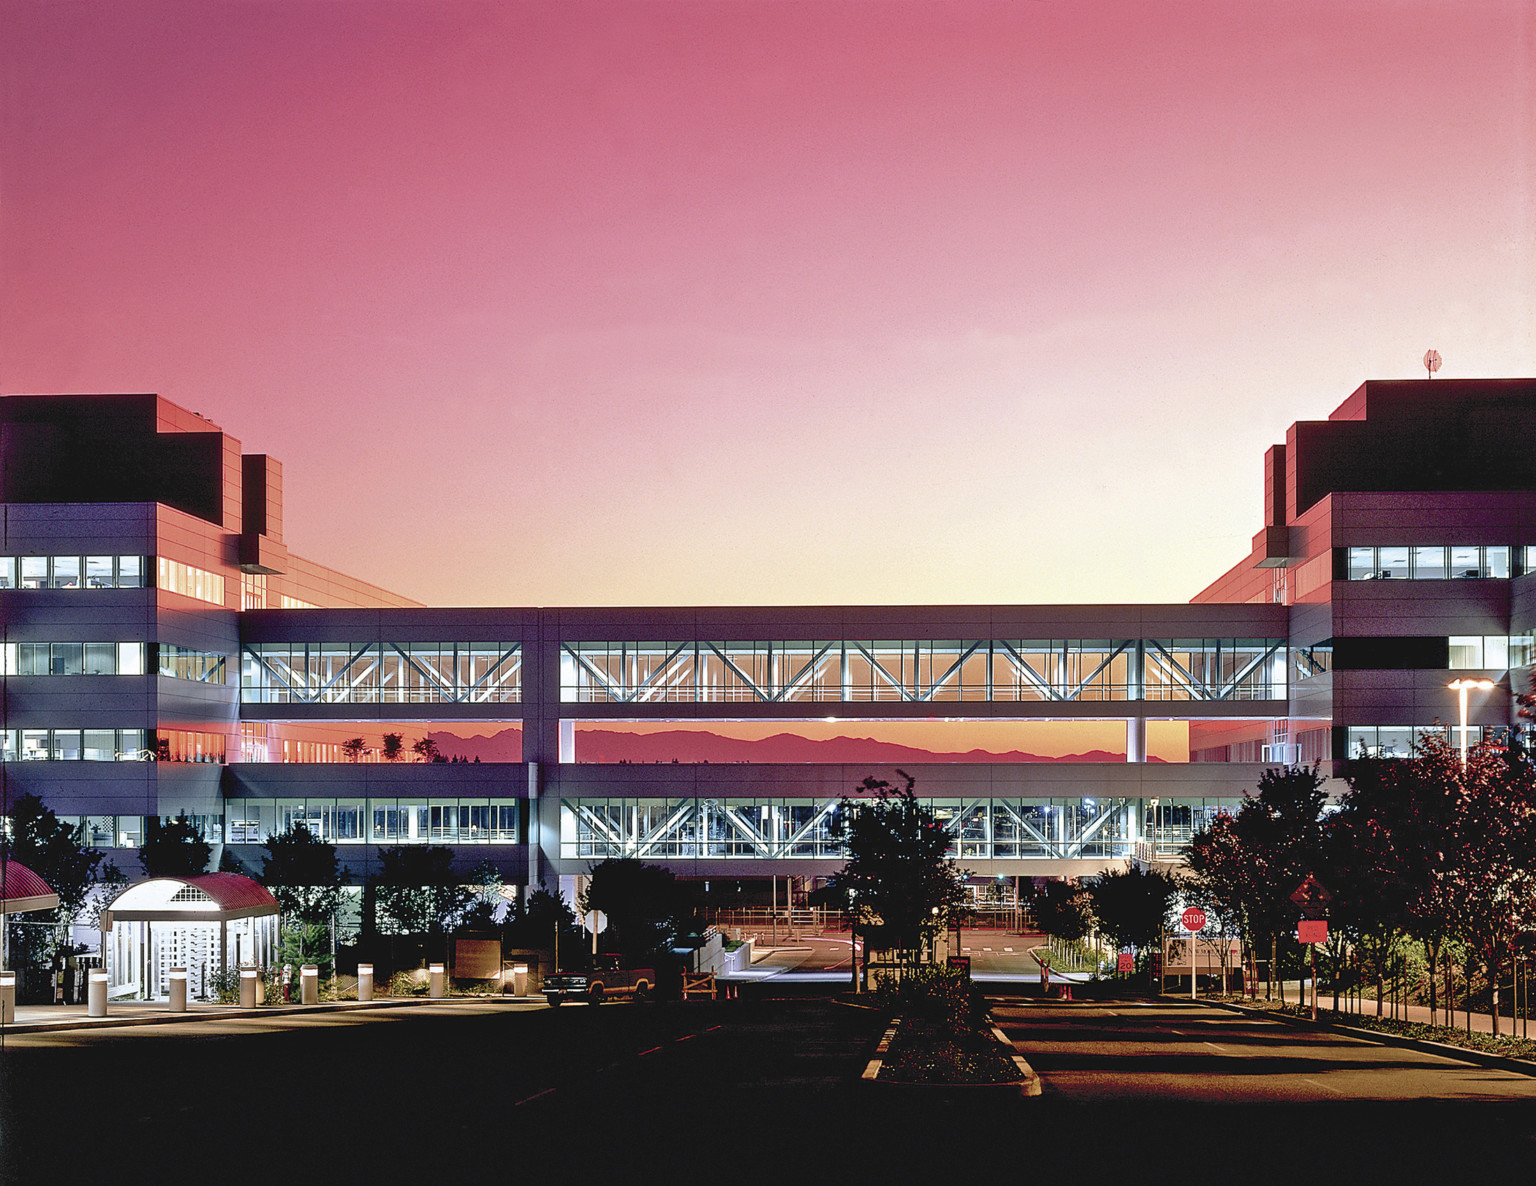 Boeing Everett 777 Office Complex at sunset with pink sky illuminating breezeway above two-way street